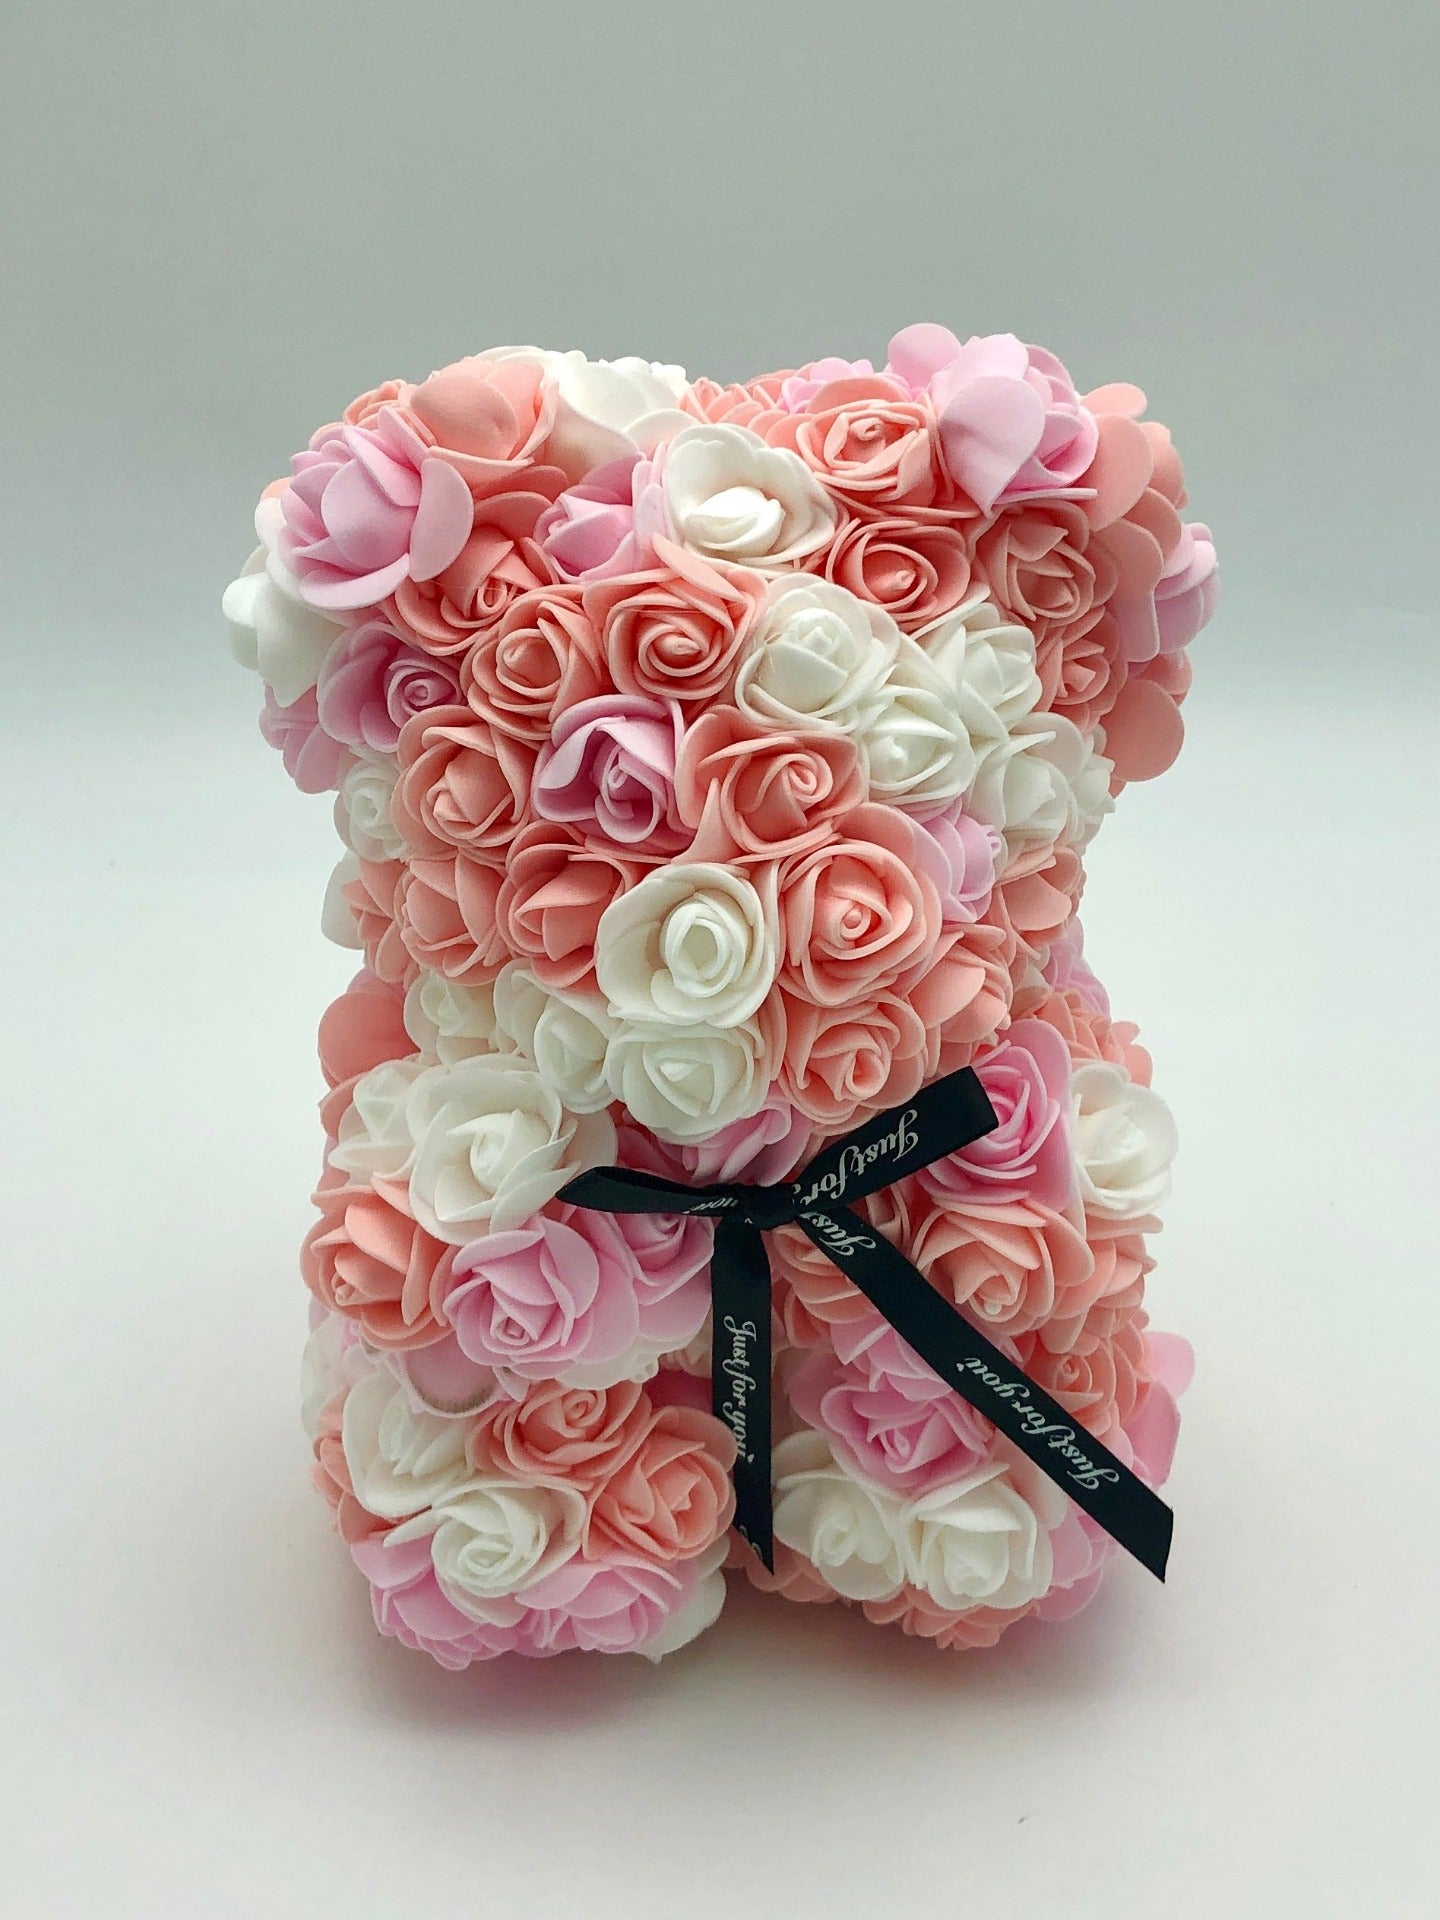 This is an image of a teddy bear made from roses in various shades of pink, white, and peach, available in Melbourne.